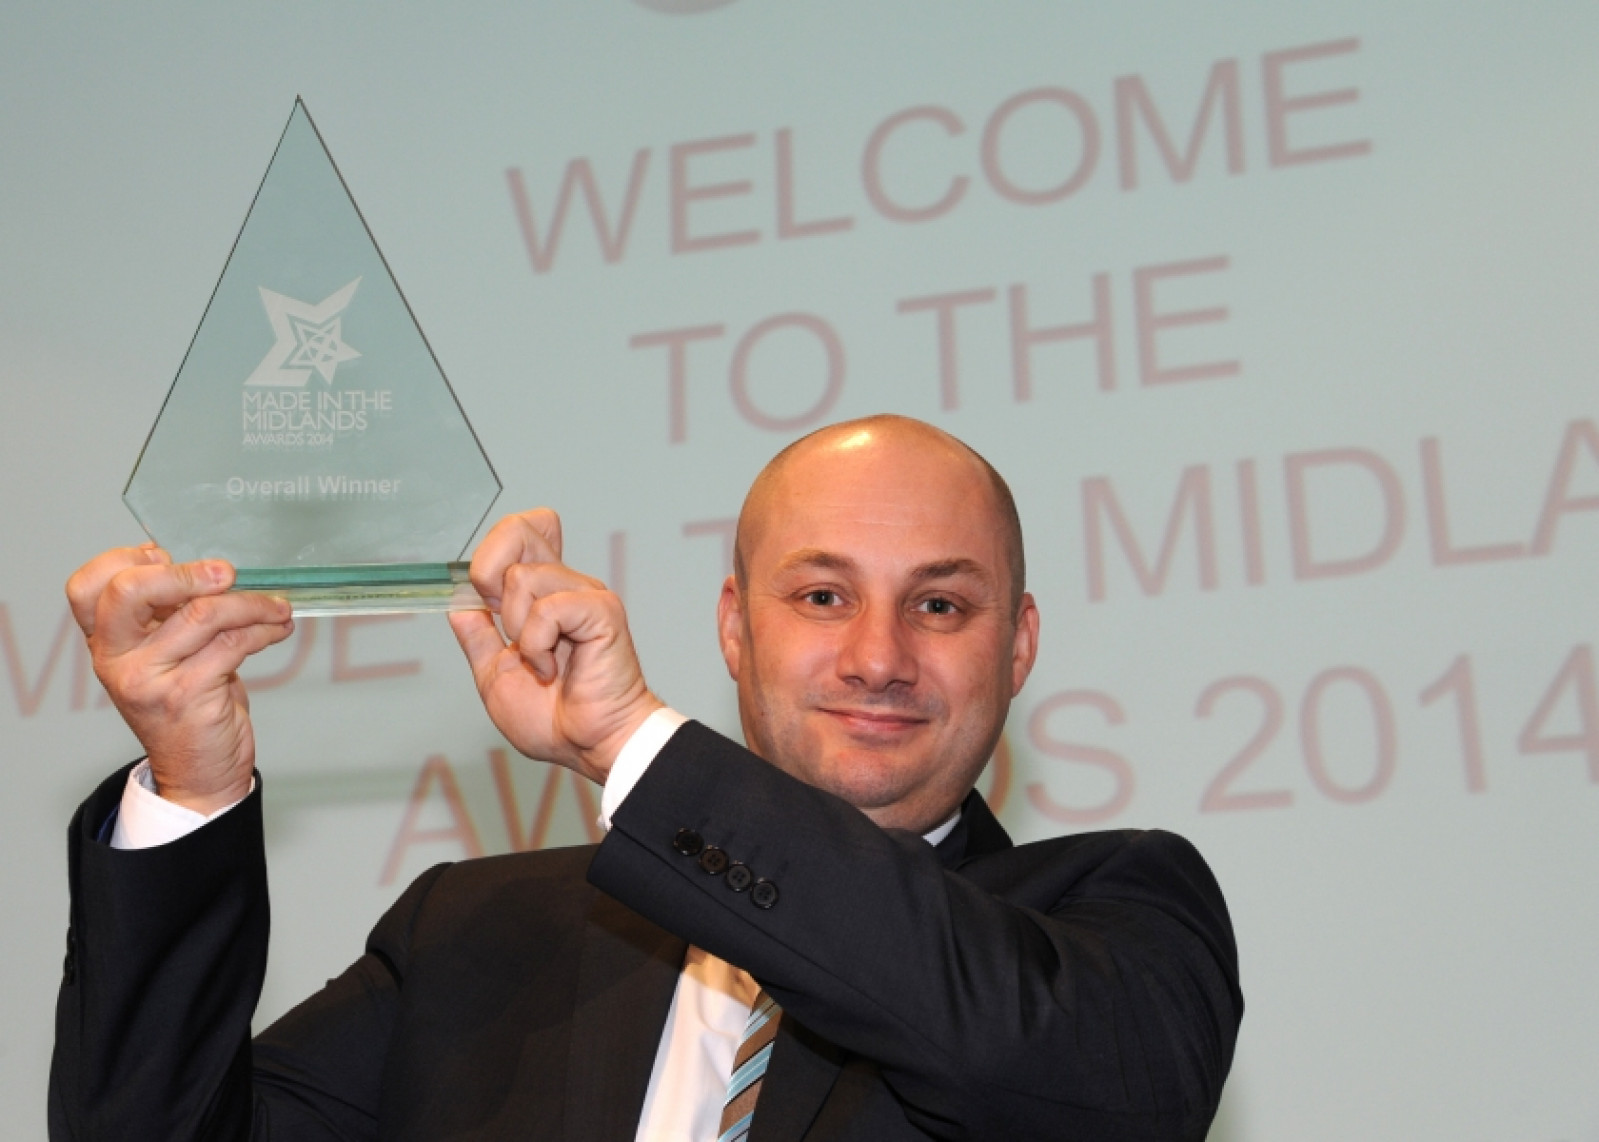 The MIM Awards Photos are now live on our Facebook...